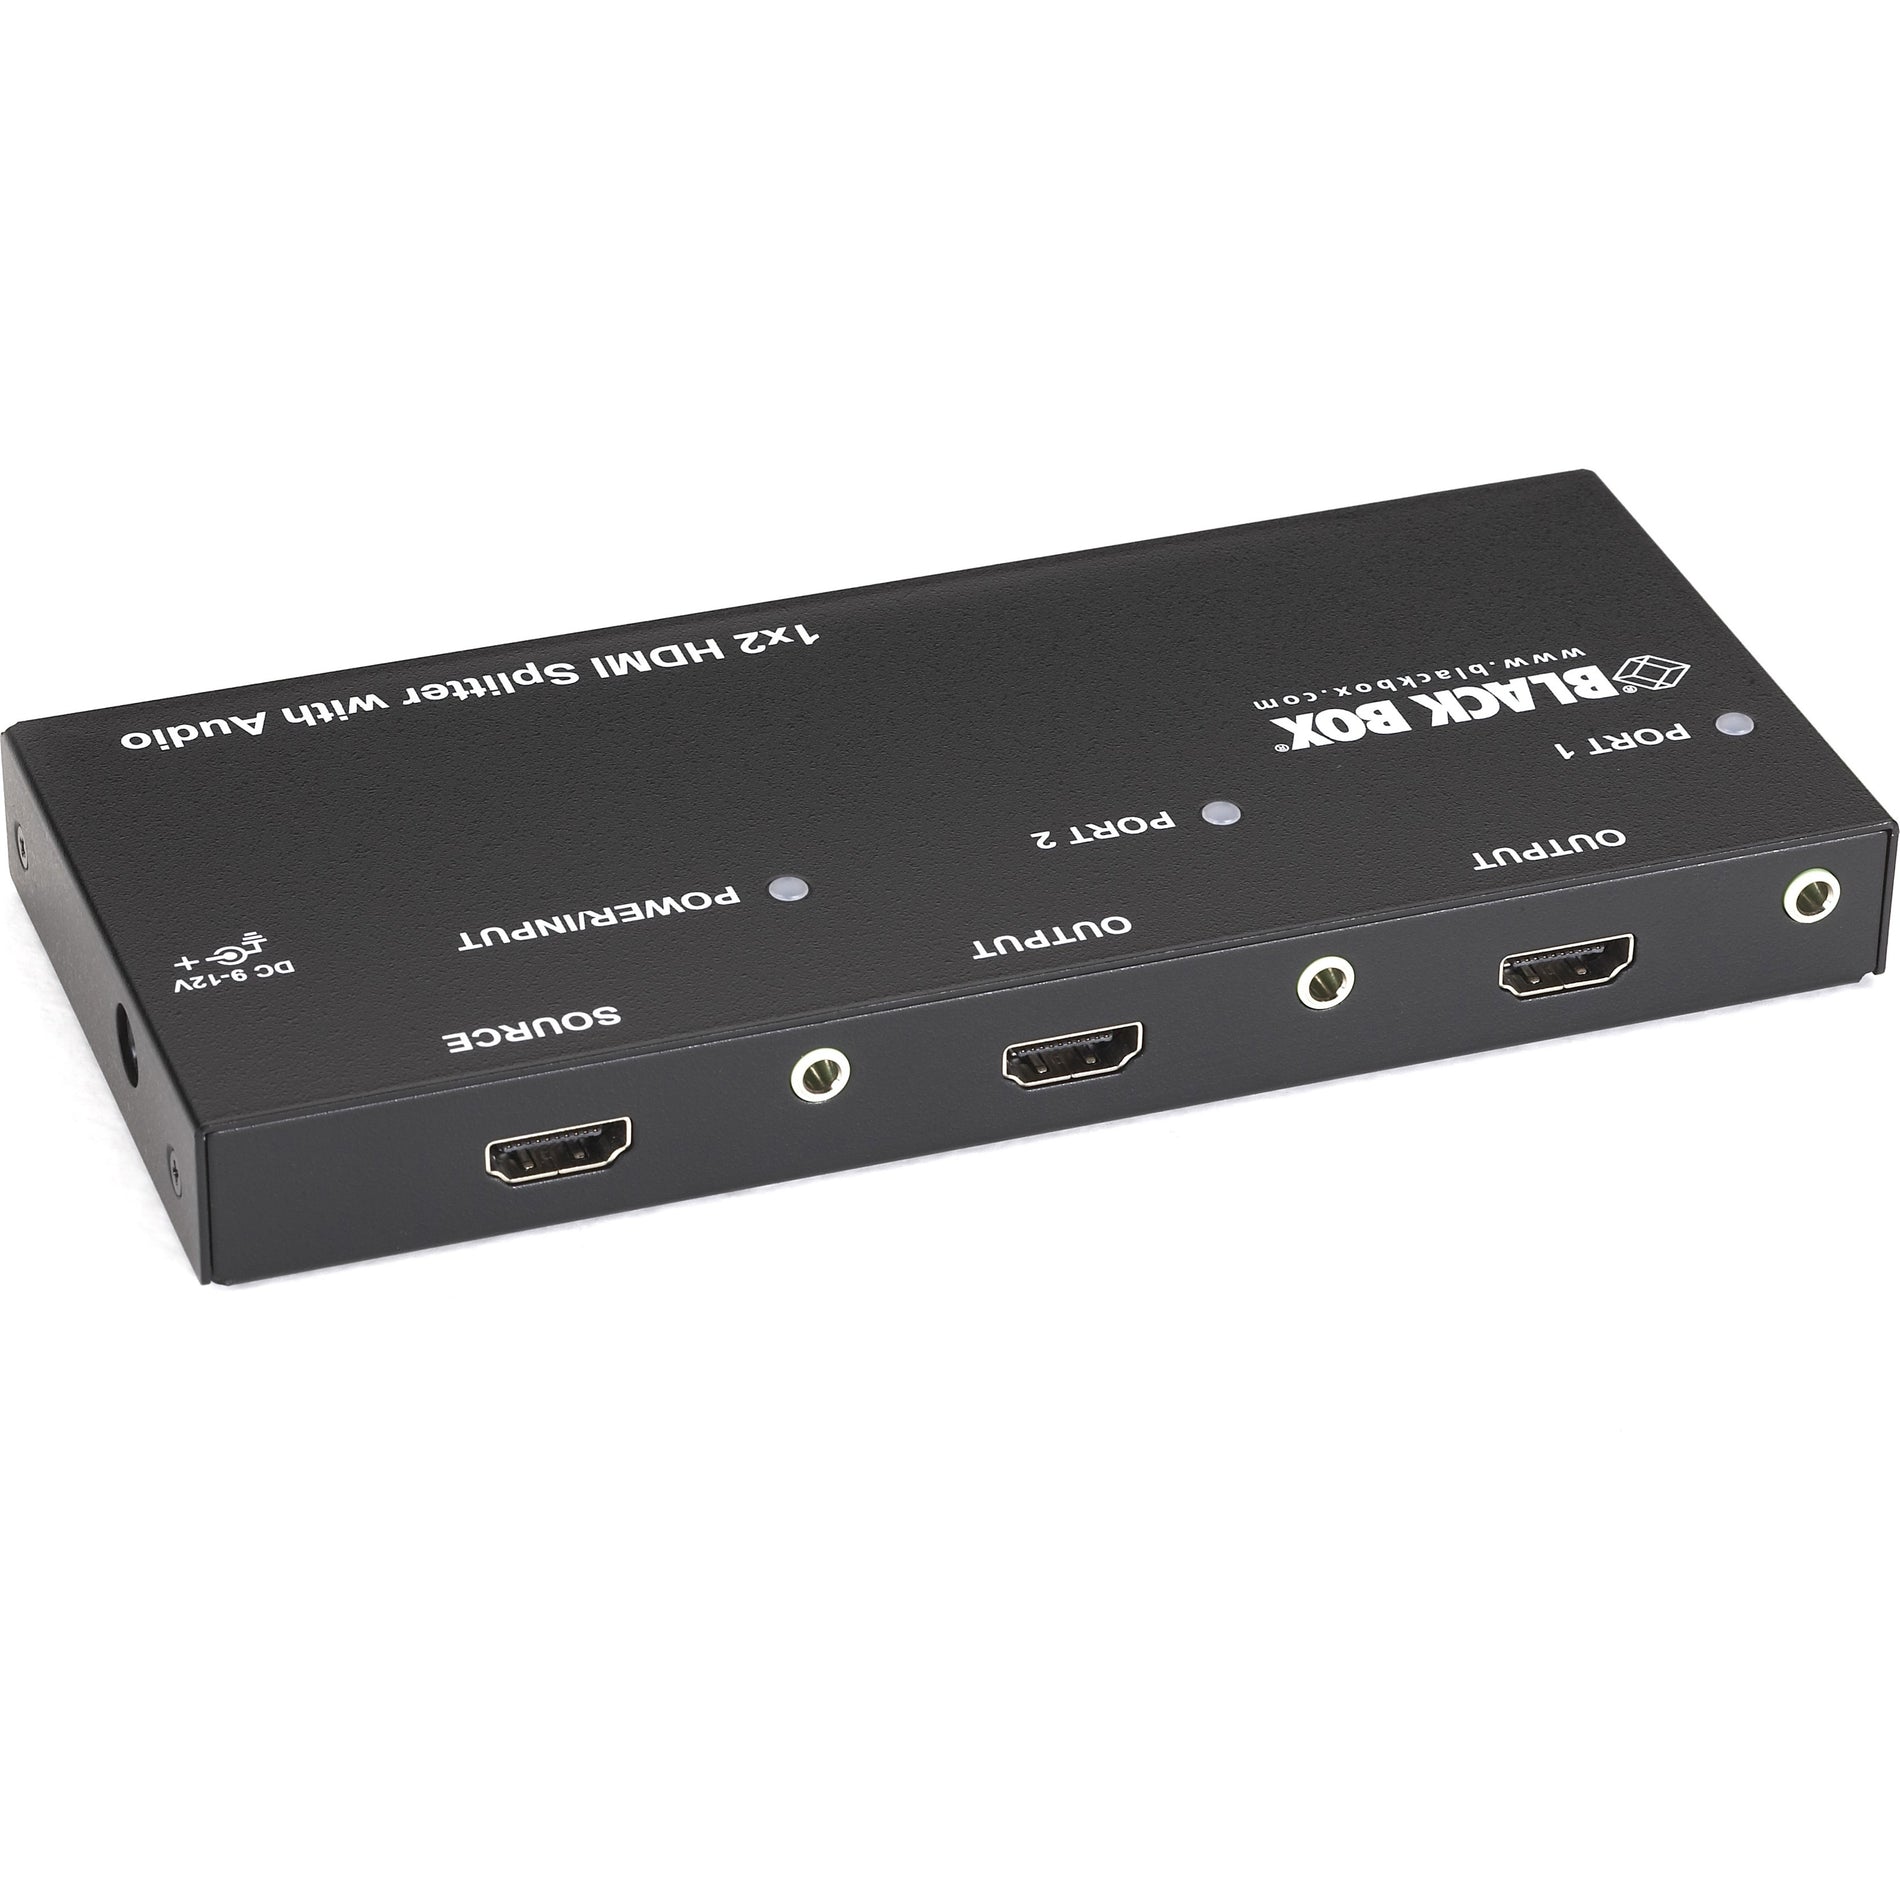 Black Box AVSP-HDMI1X2 1 x 2 HDMI Splitter with Audio, Fully HDCP Compliant, Blu-ray Ready, Simple to Set Up